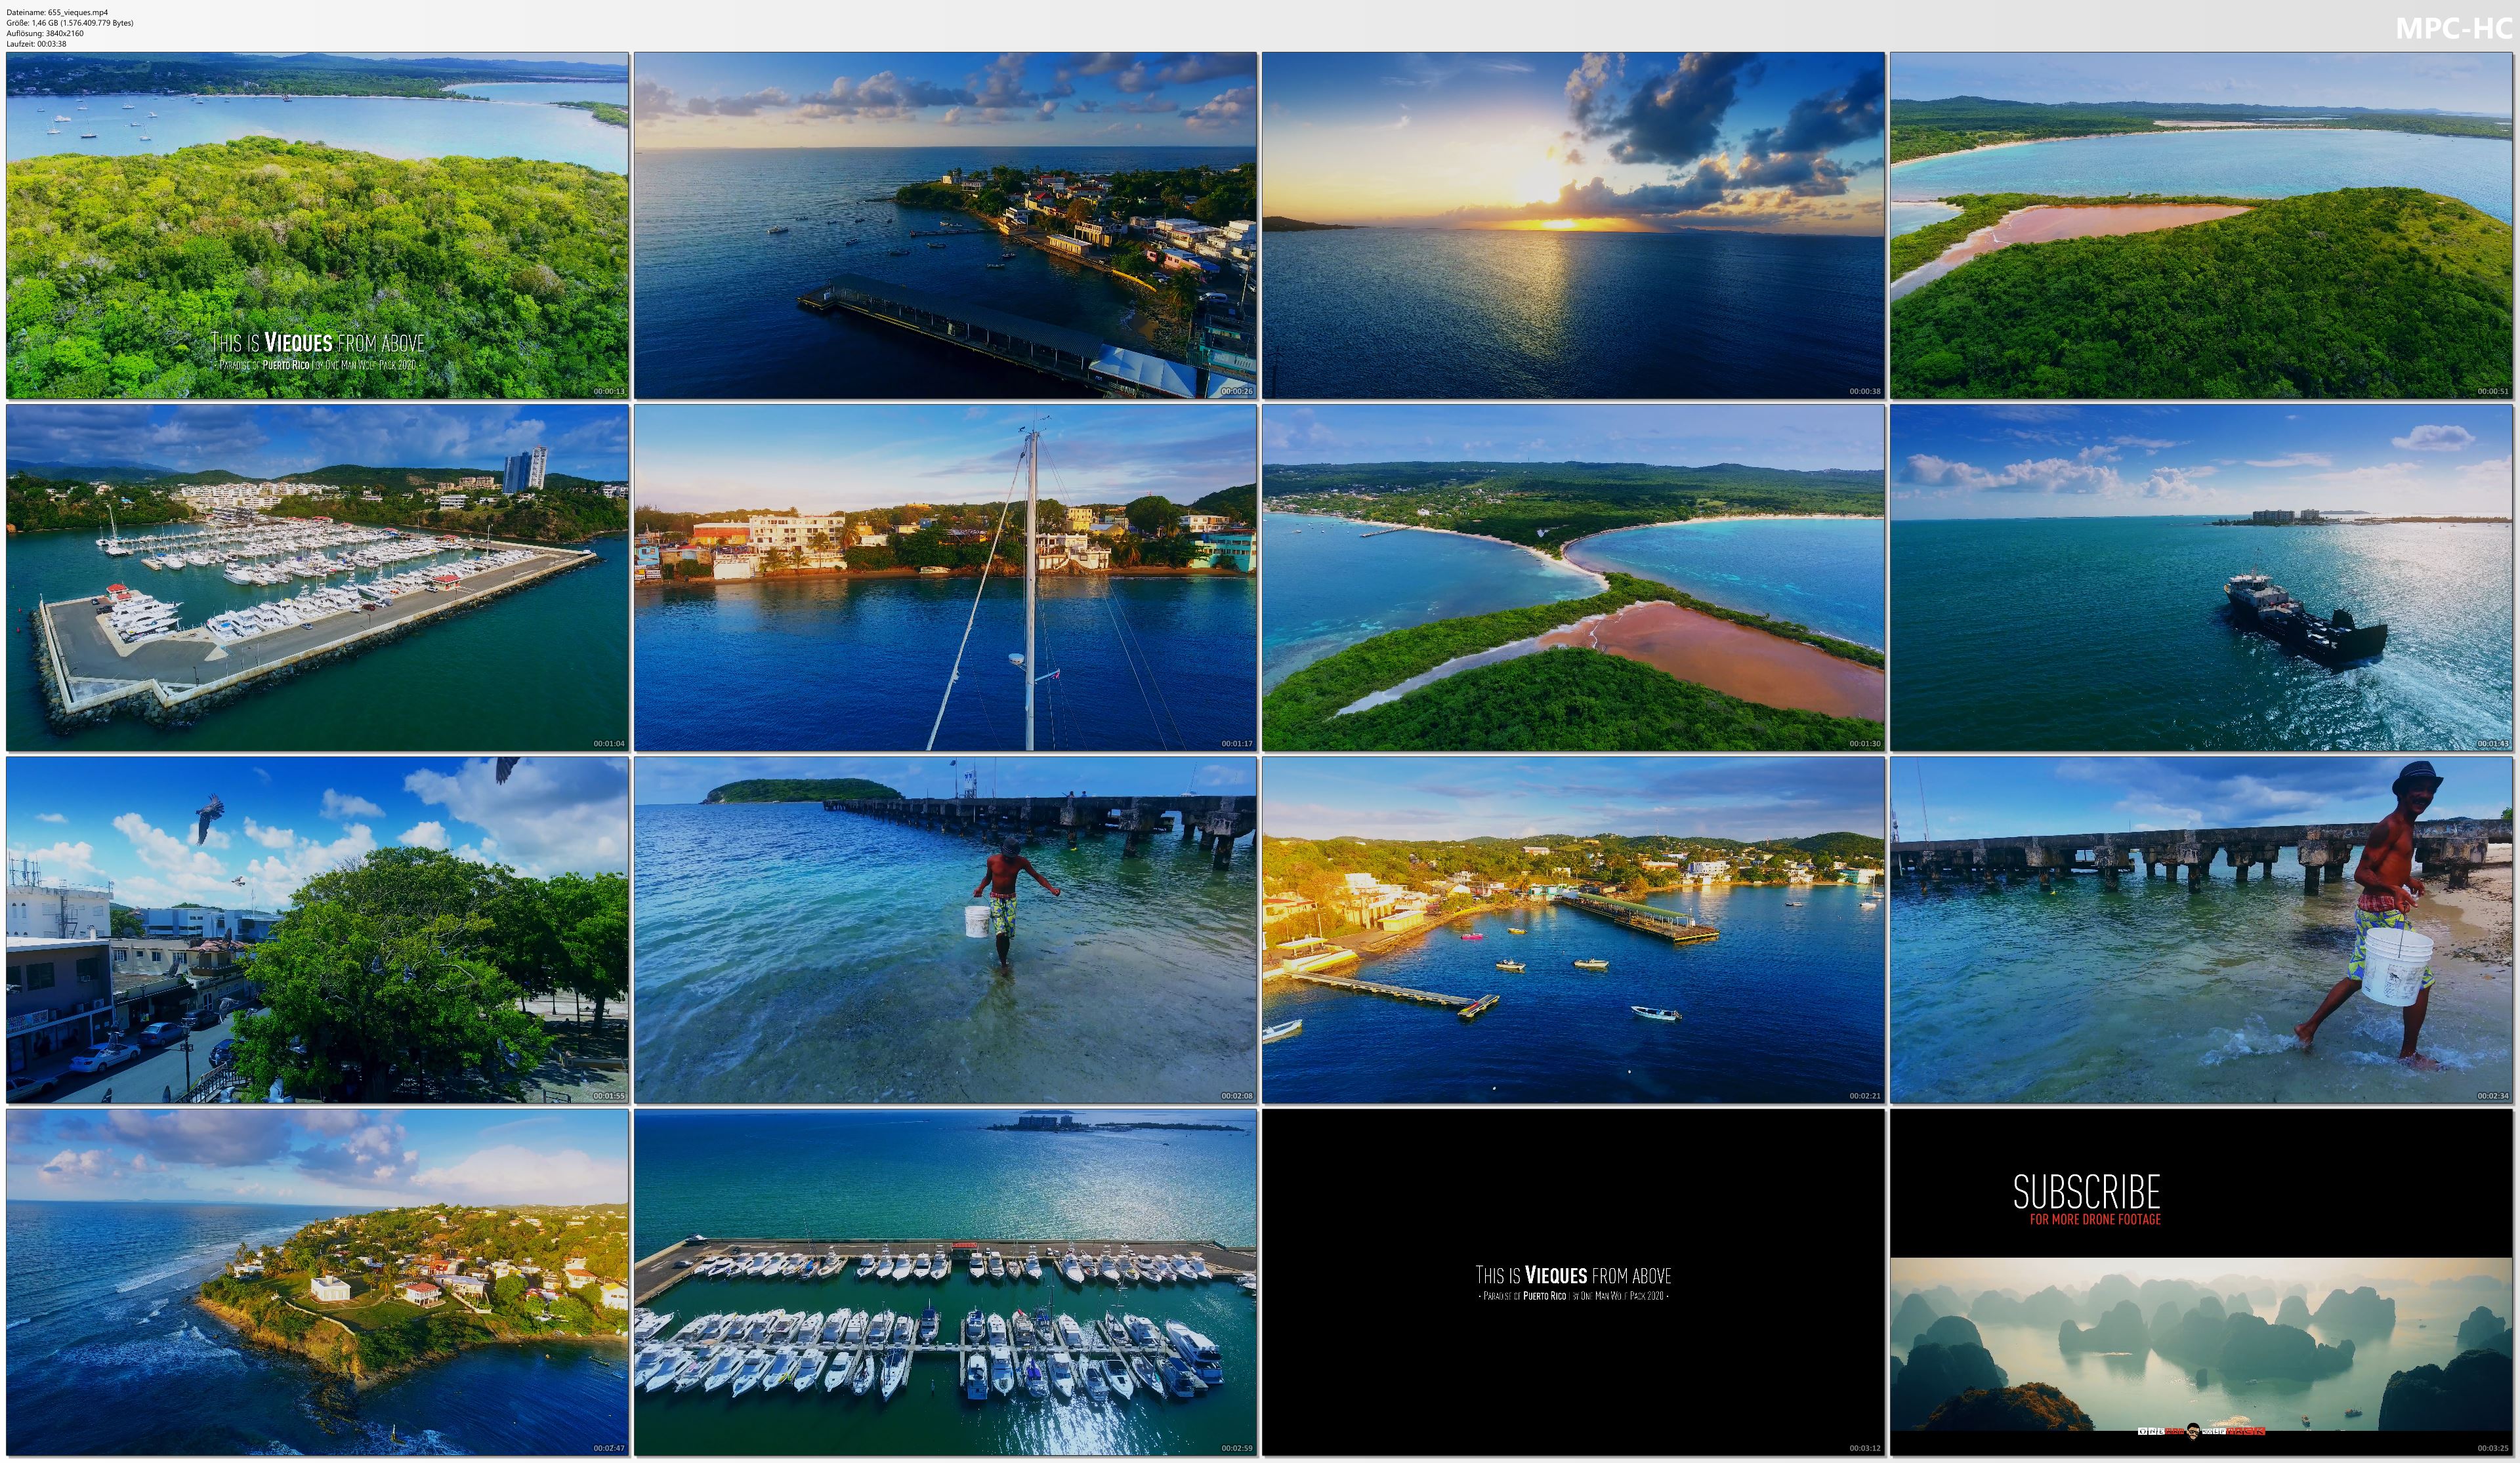 Drone Pictures from Video 【4K】Sunset in Vieques from Above - PUERTO RICO 2020 | Cinematic Wolf Aerial™ Drone Film